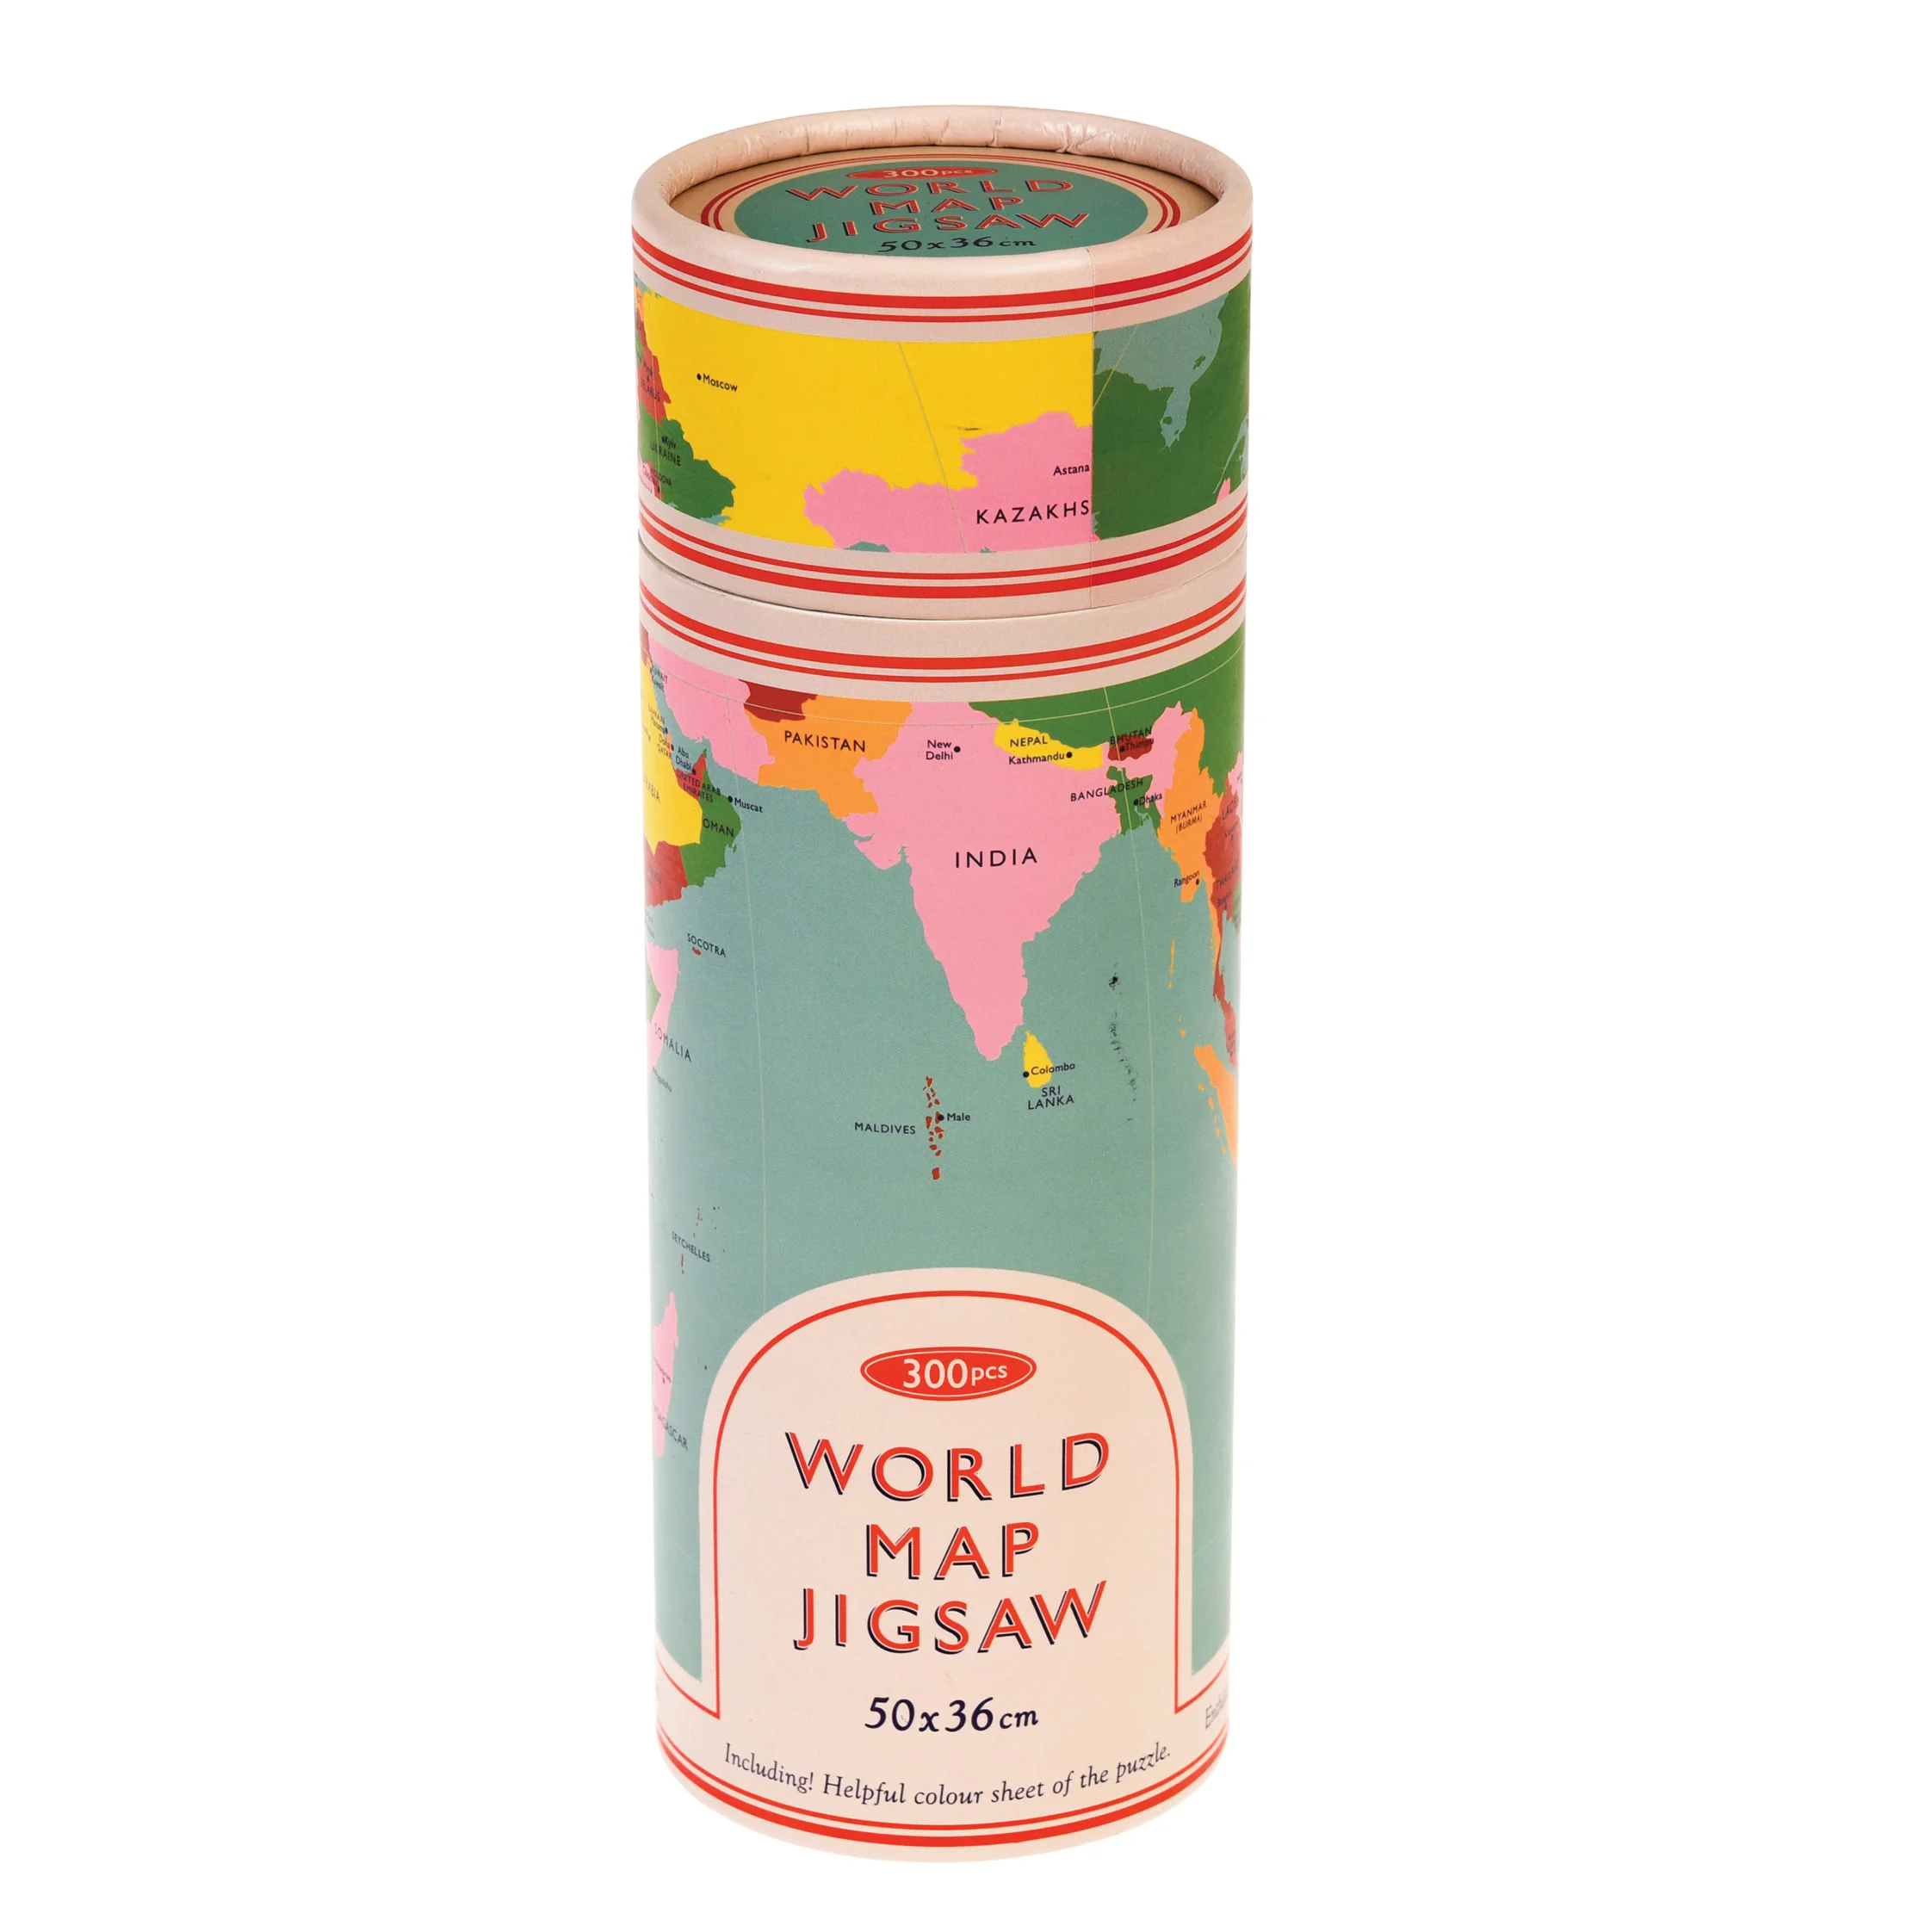 jigsaw puzzle in a tube (300 piece) - world map